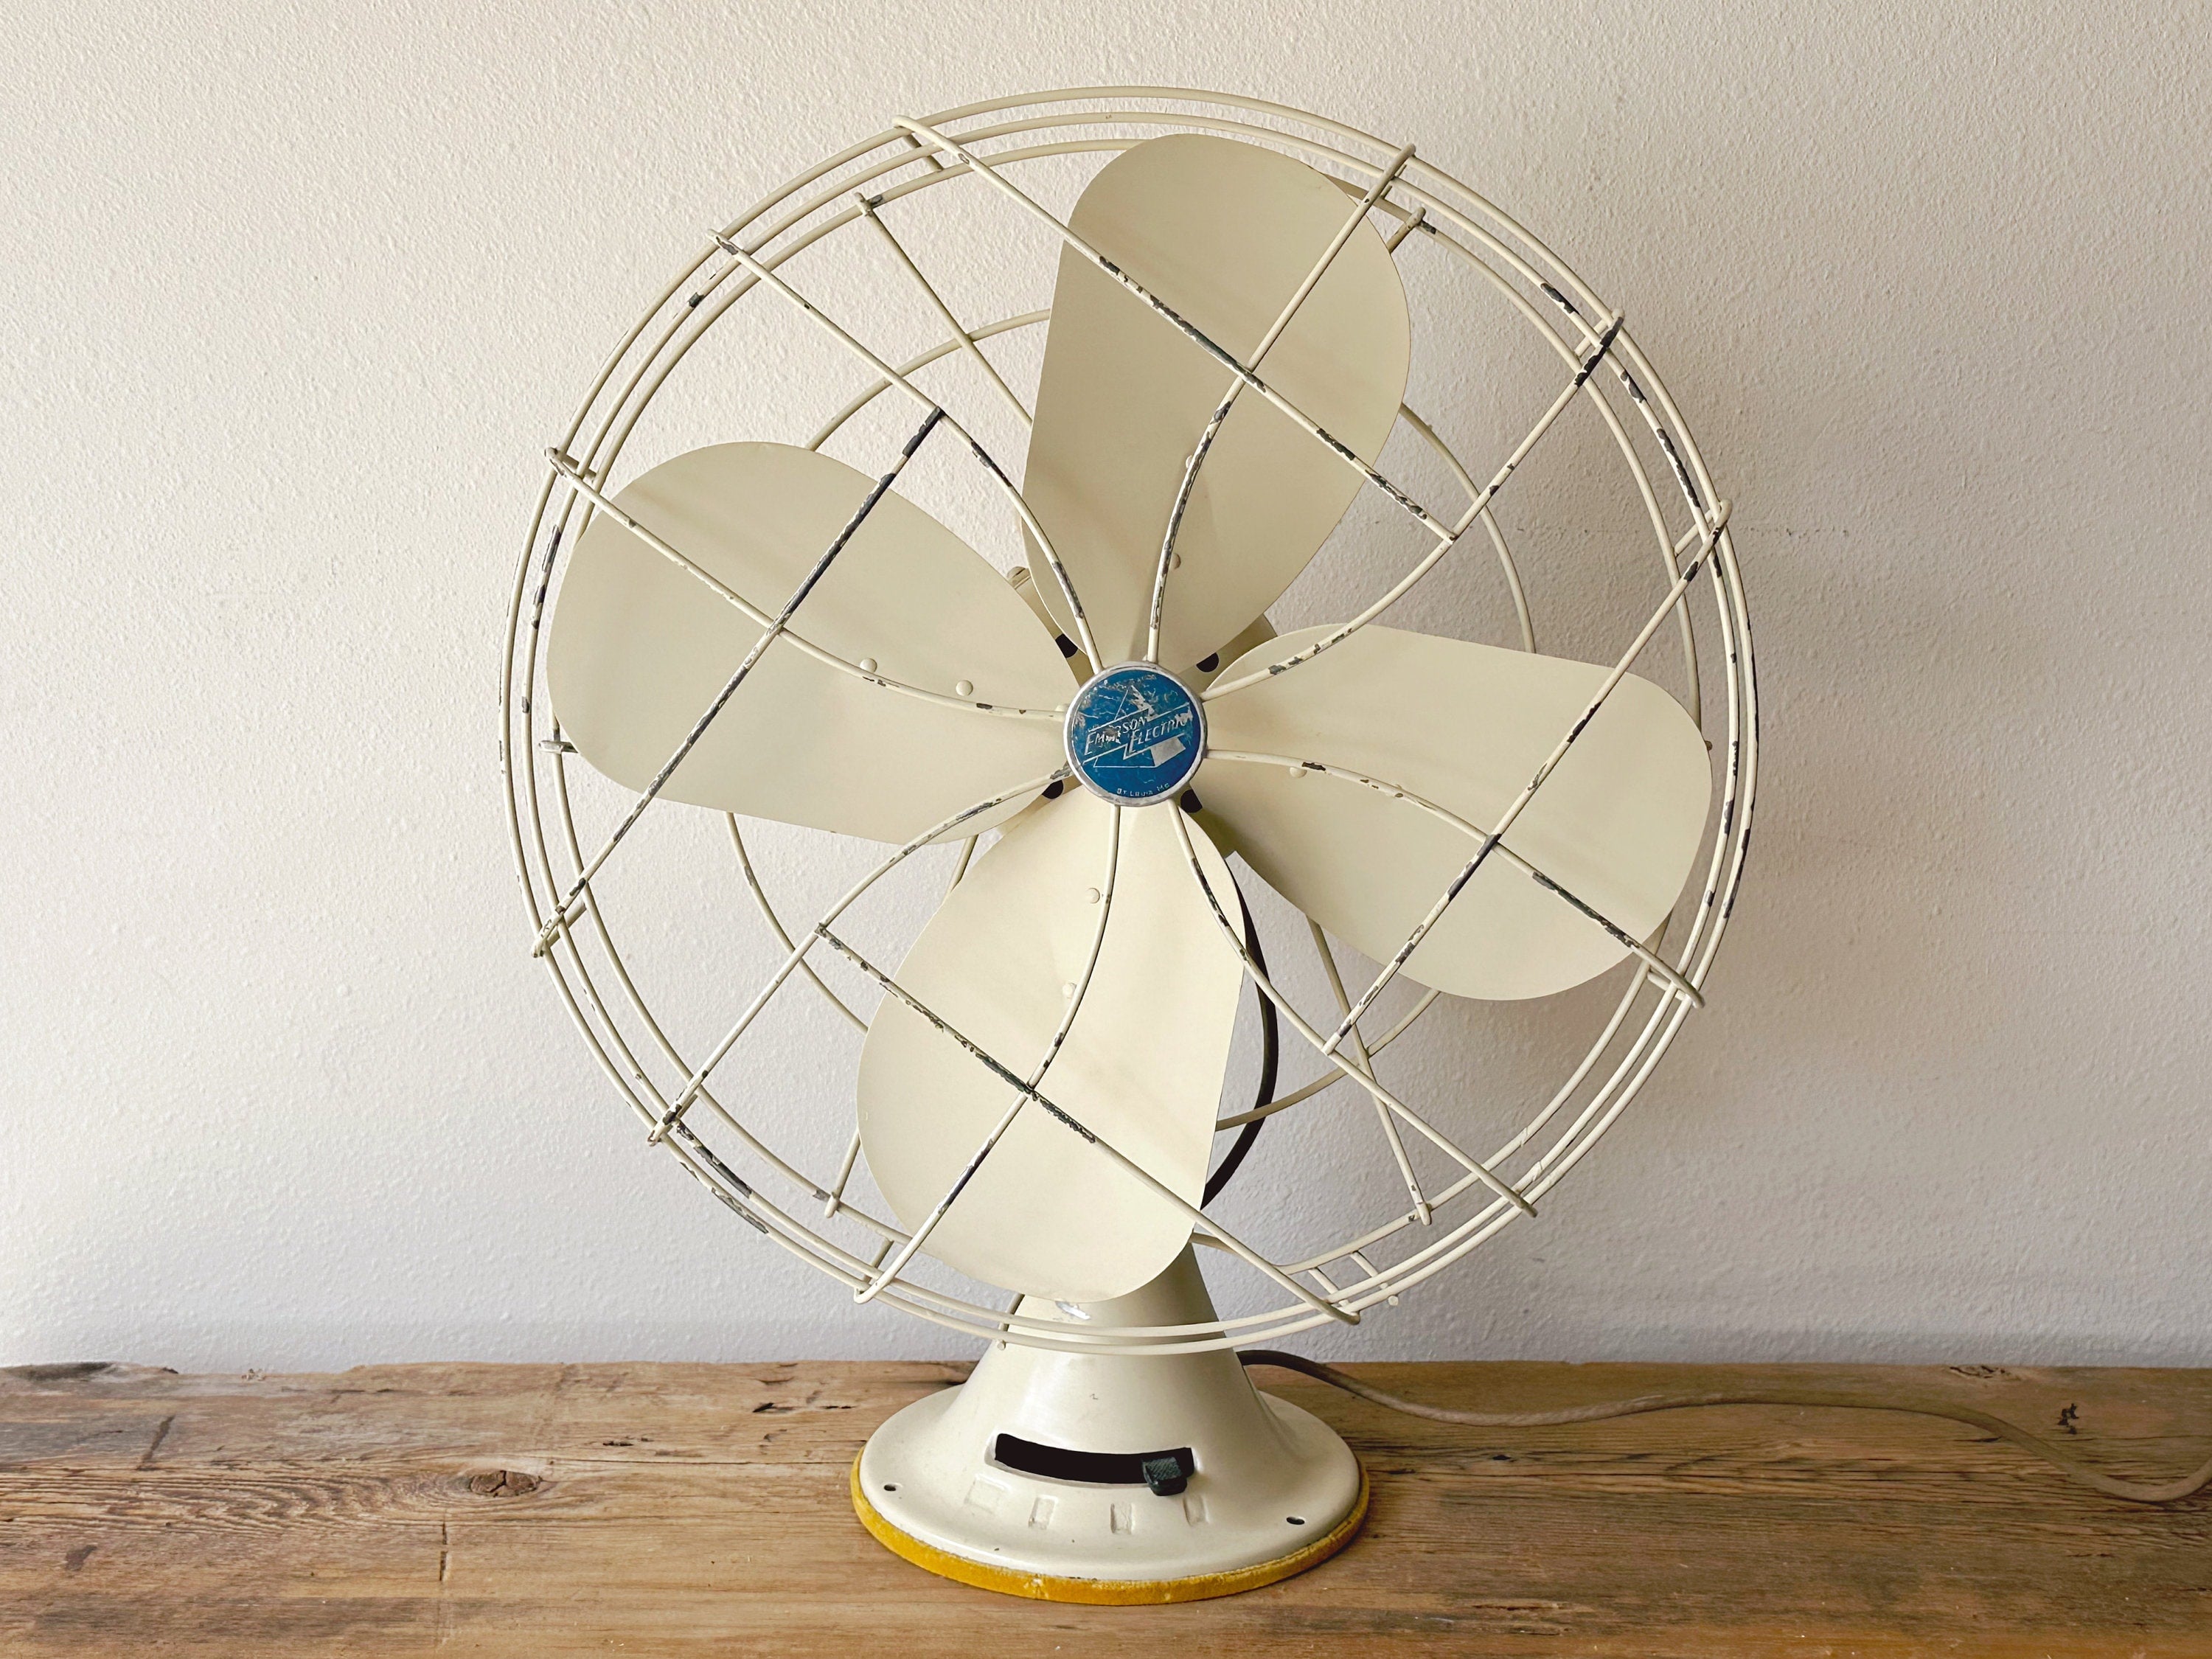 Vintage 1940s Emerson Electric Industrial 3-Speed Oscillating Electric Fan in White | 4-Blade Table Fan Model 79648-AX in Working Condition